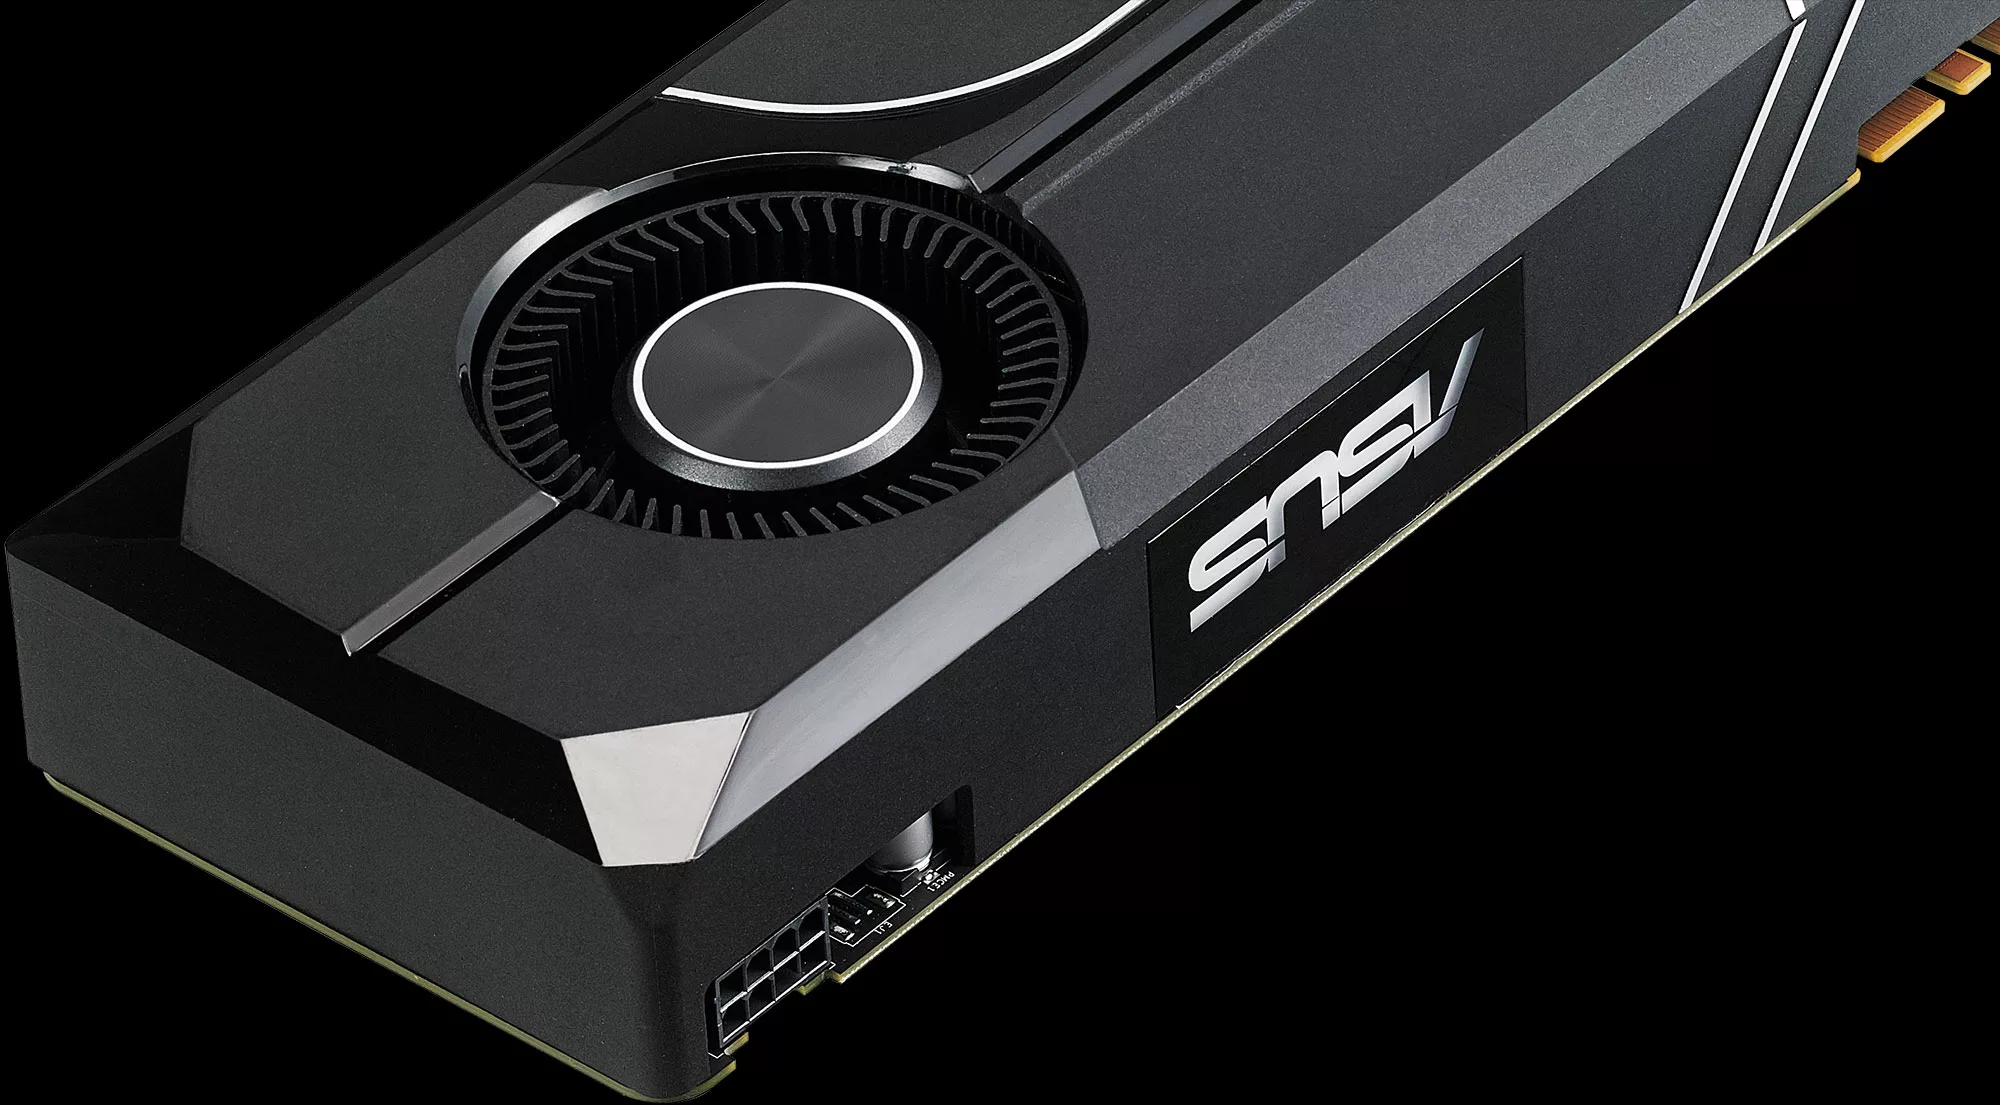 ROG Strix supersizes the GeForce GTX 1070 Ti graphics card | ROG - Republic  of Gamers Global